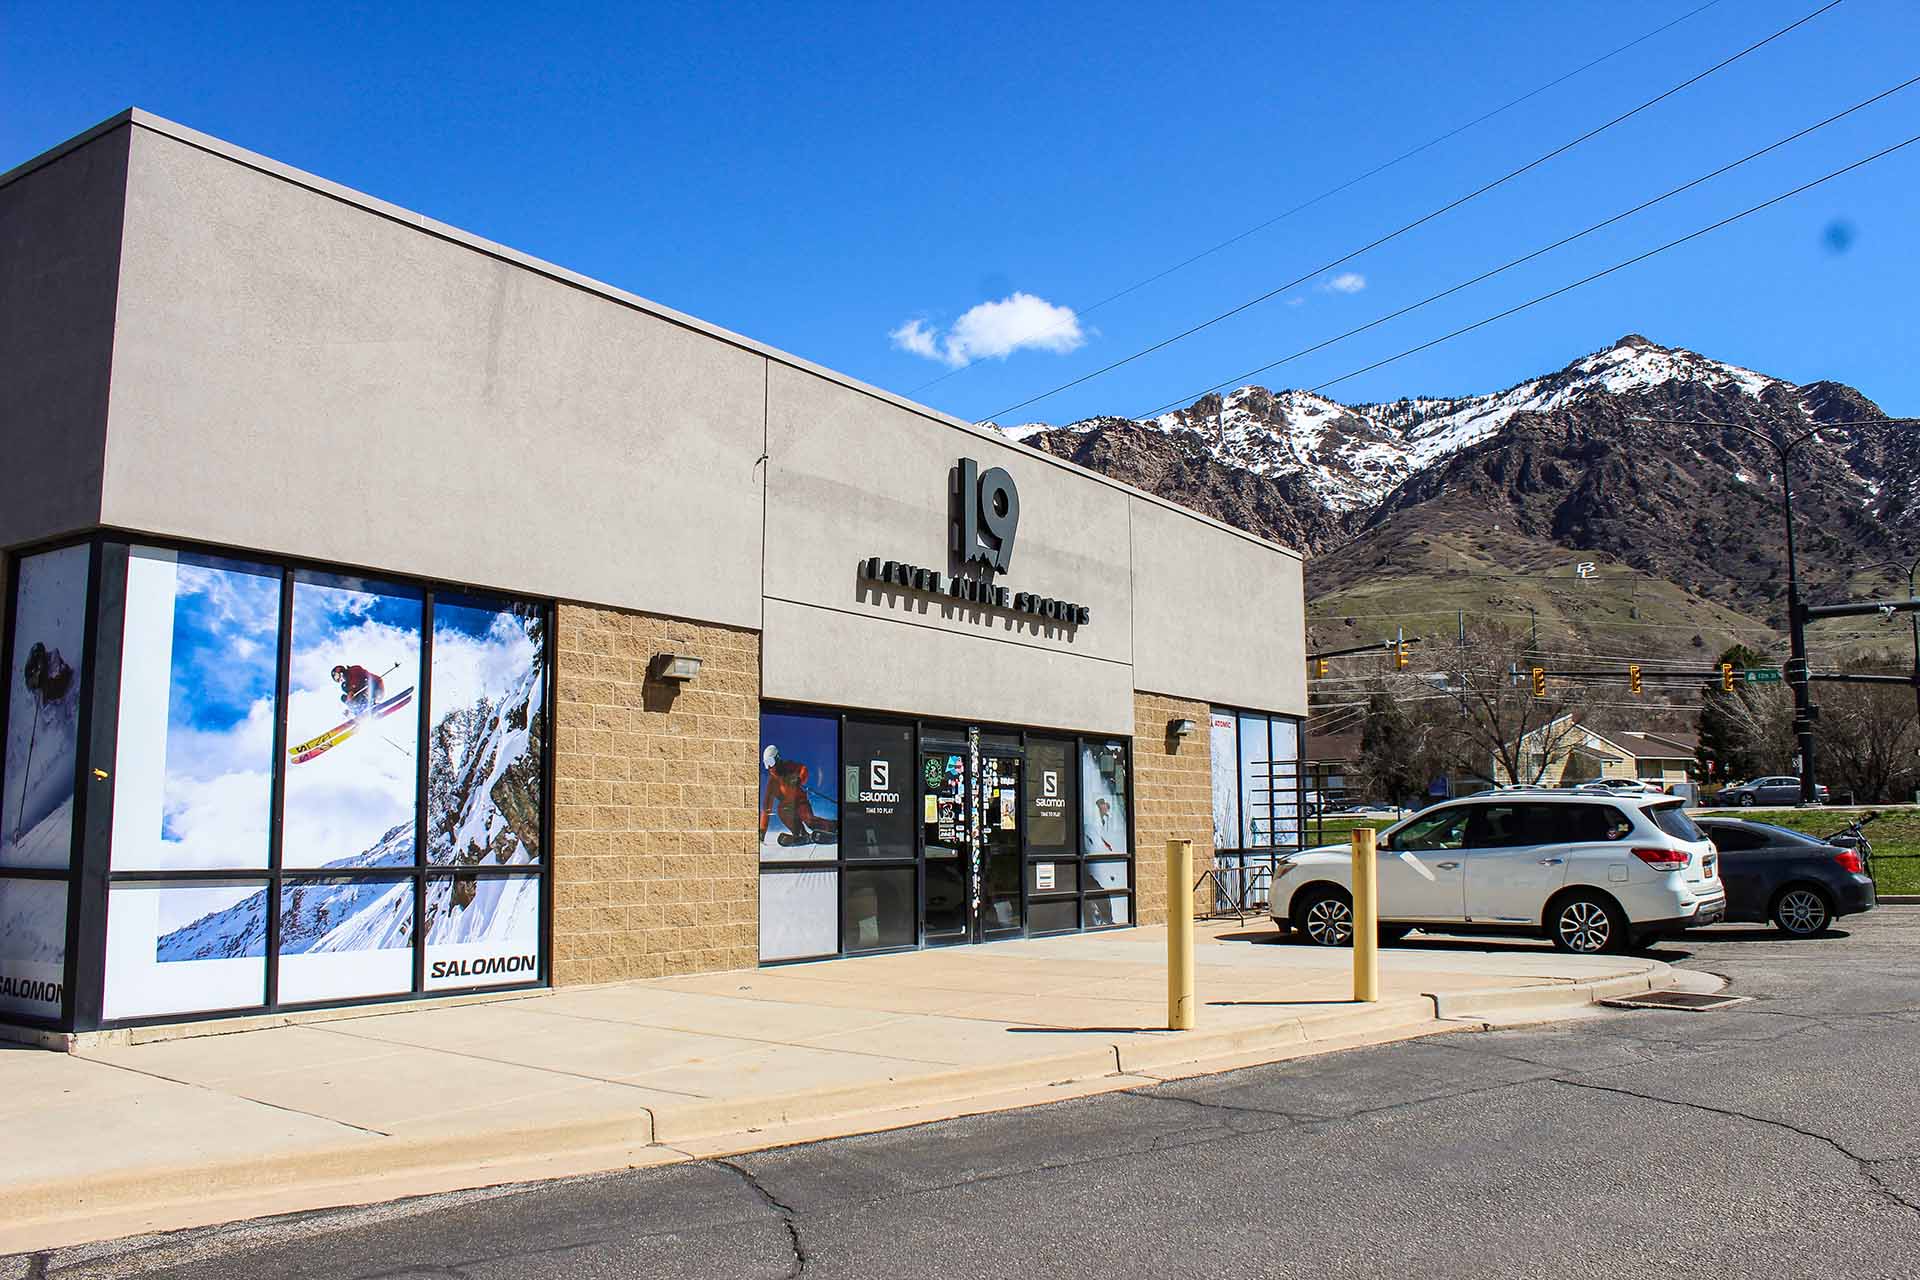 A old Hollywood video store transformed into a ski and bike shop with a Level Nine Sports sign on the front wall